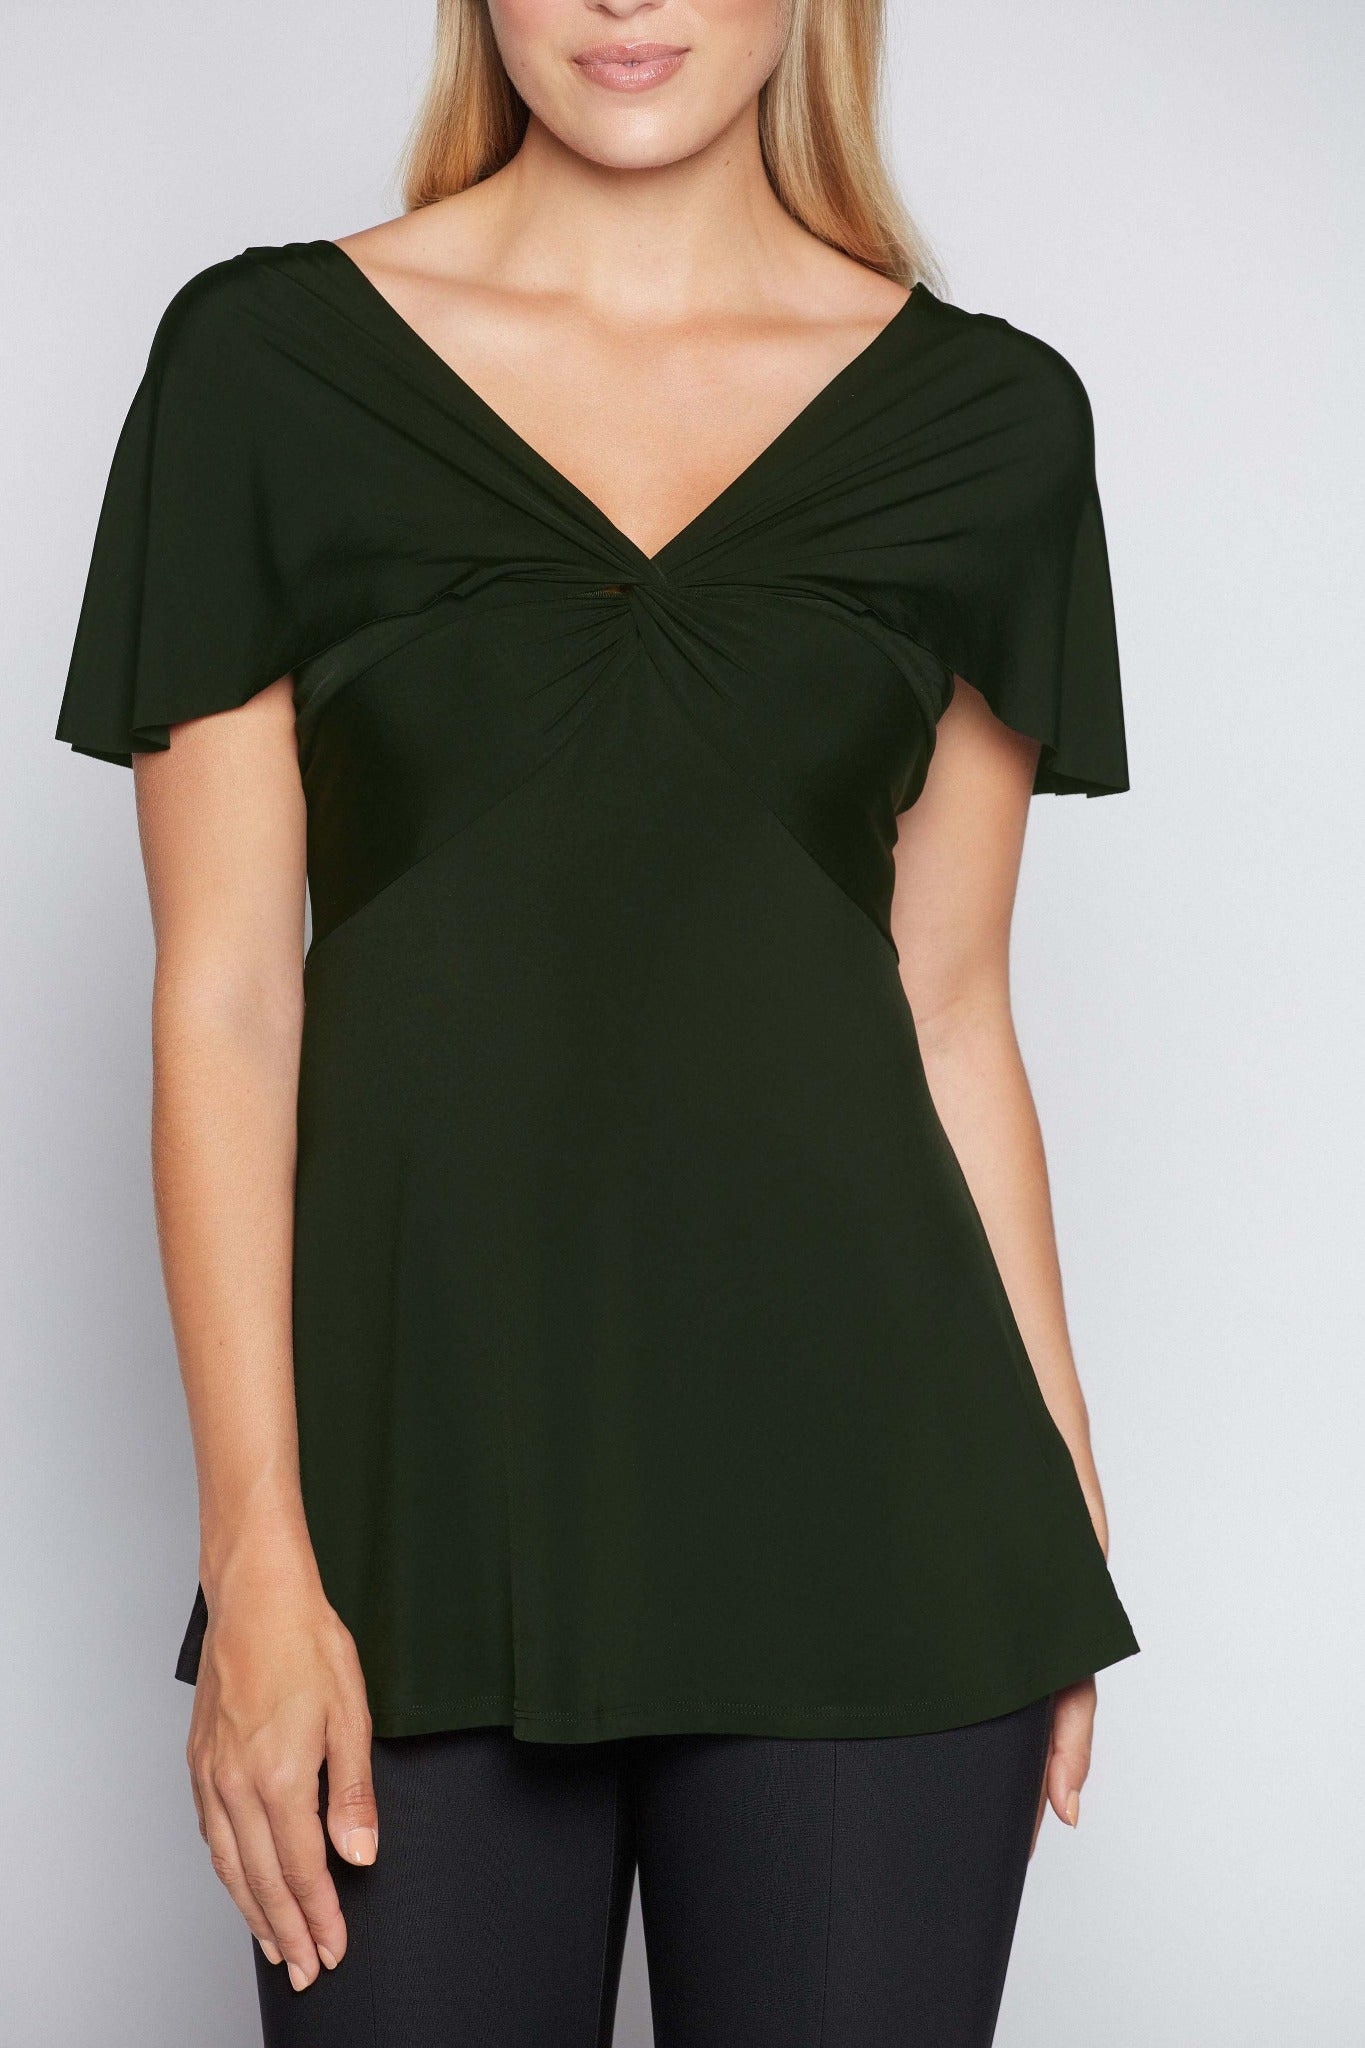 Woman wearing a fuller bust low cut v-neck top with a butterfly twist detail at the empire waist in bottle green stretch viscose jersey by Miriam Baker.